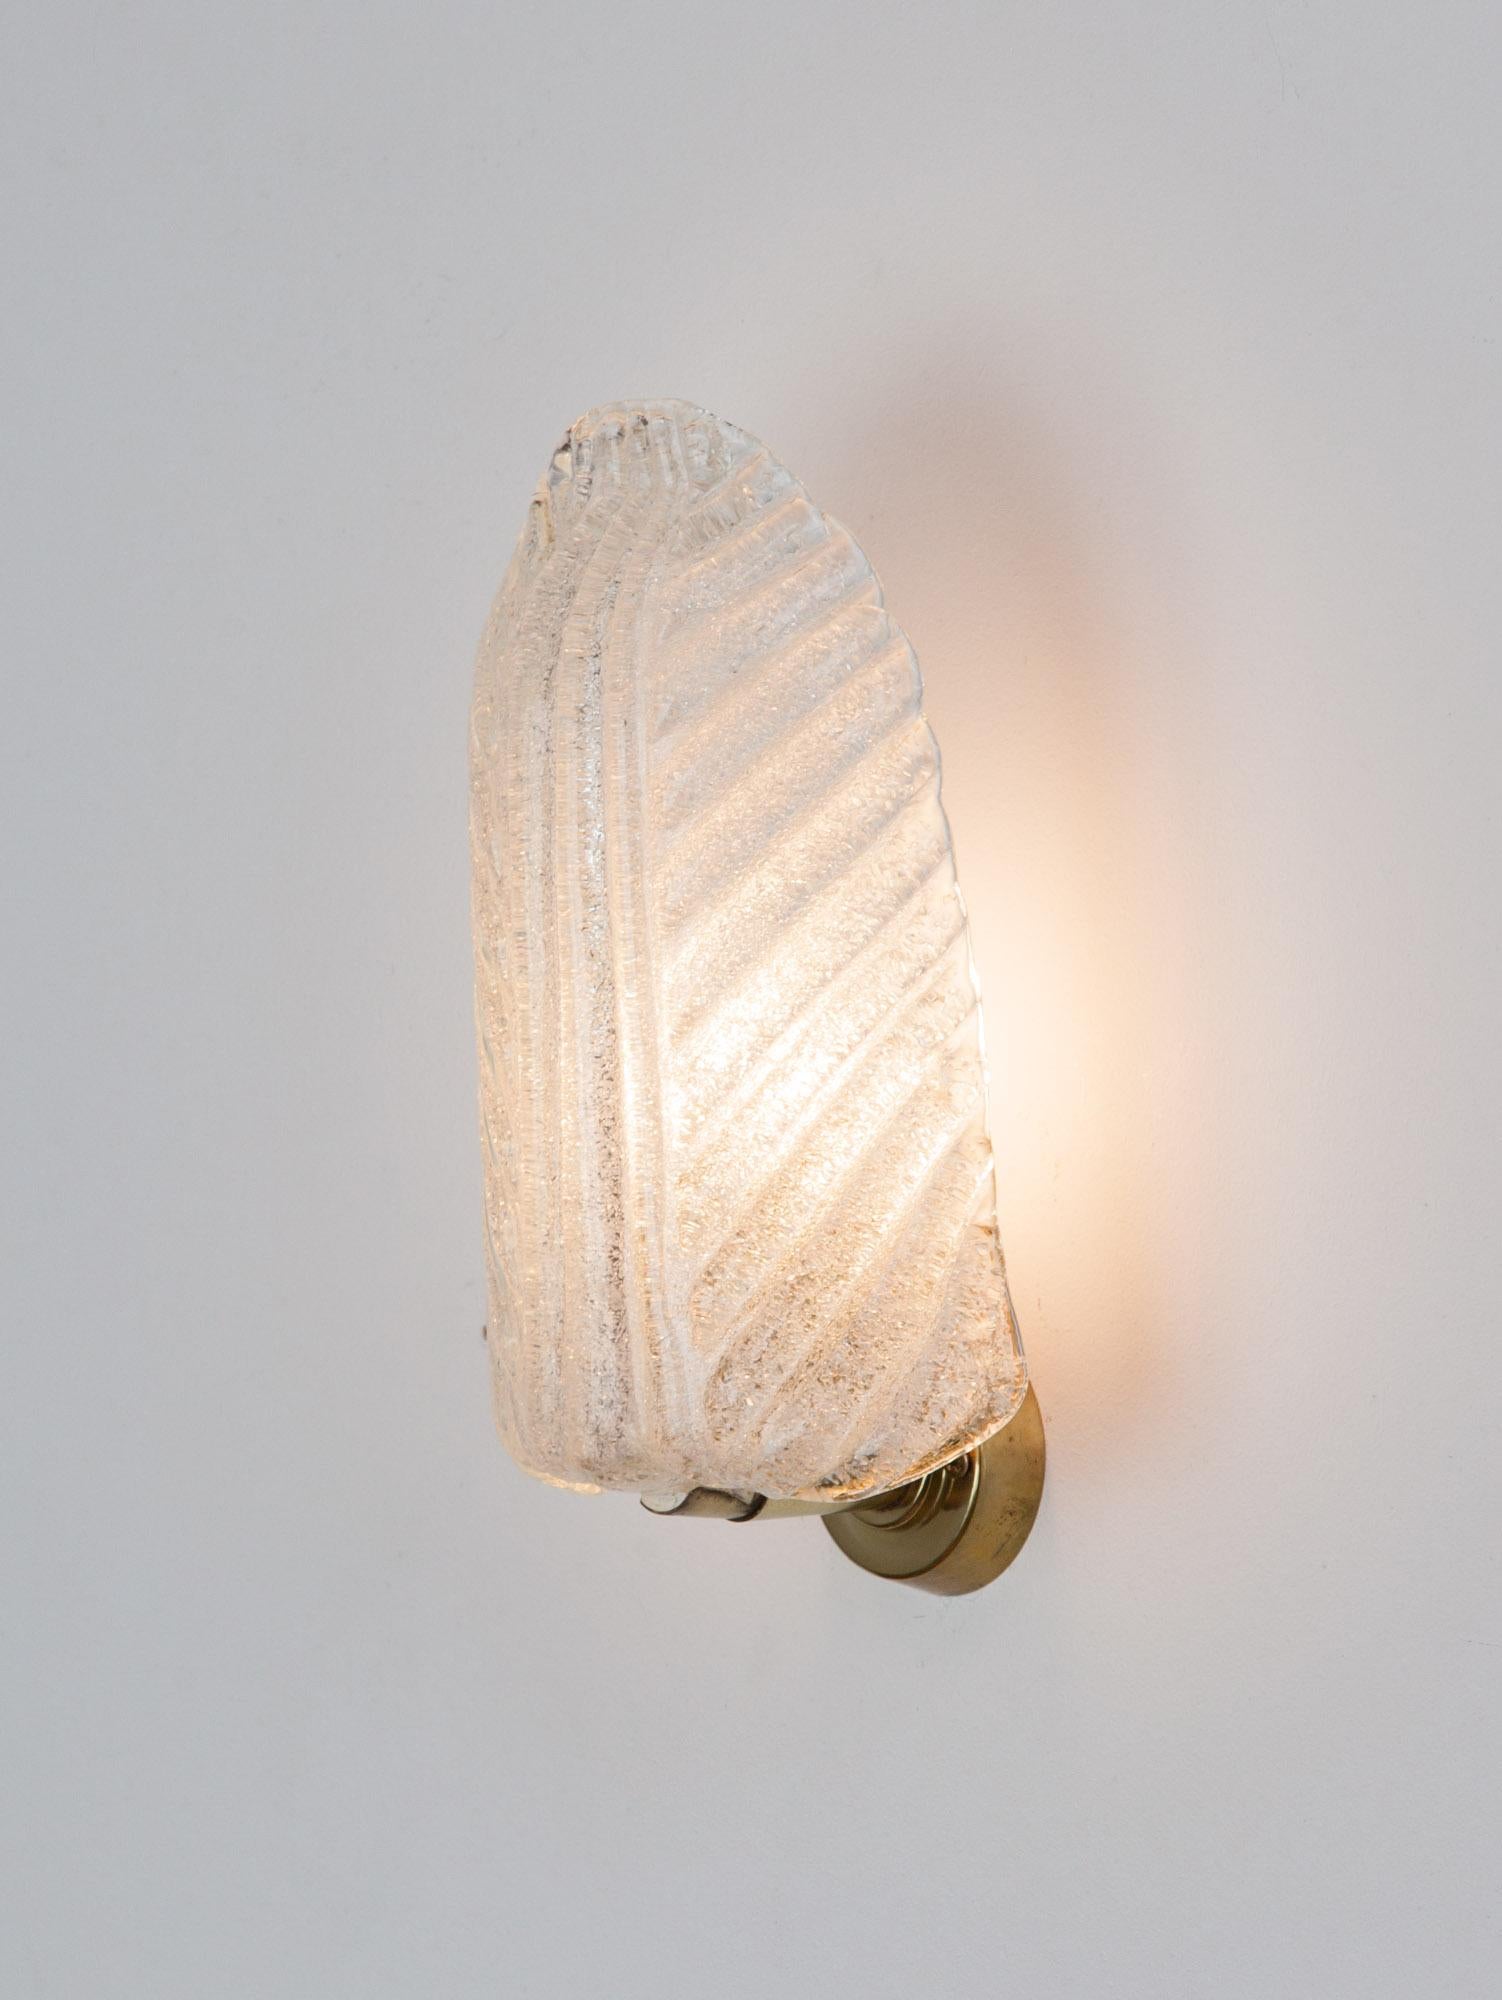 Lovely Italian Barovier (attr.) wall light with a textural Murano ‘ice’ glass shade and brass fixtures. The opaque molded glass emits a soft ambient light. Made in Italy in the 1980s.

Excellent vintage condition with minor signs of wear. The